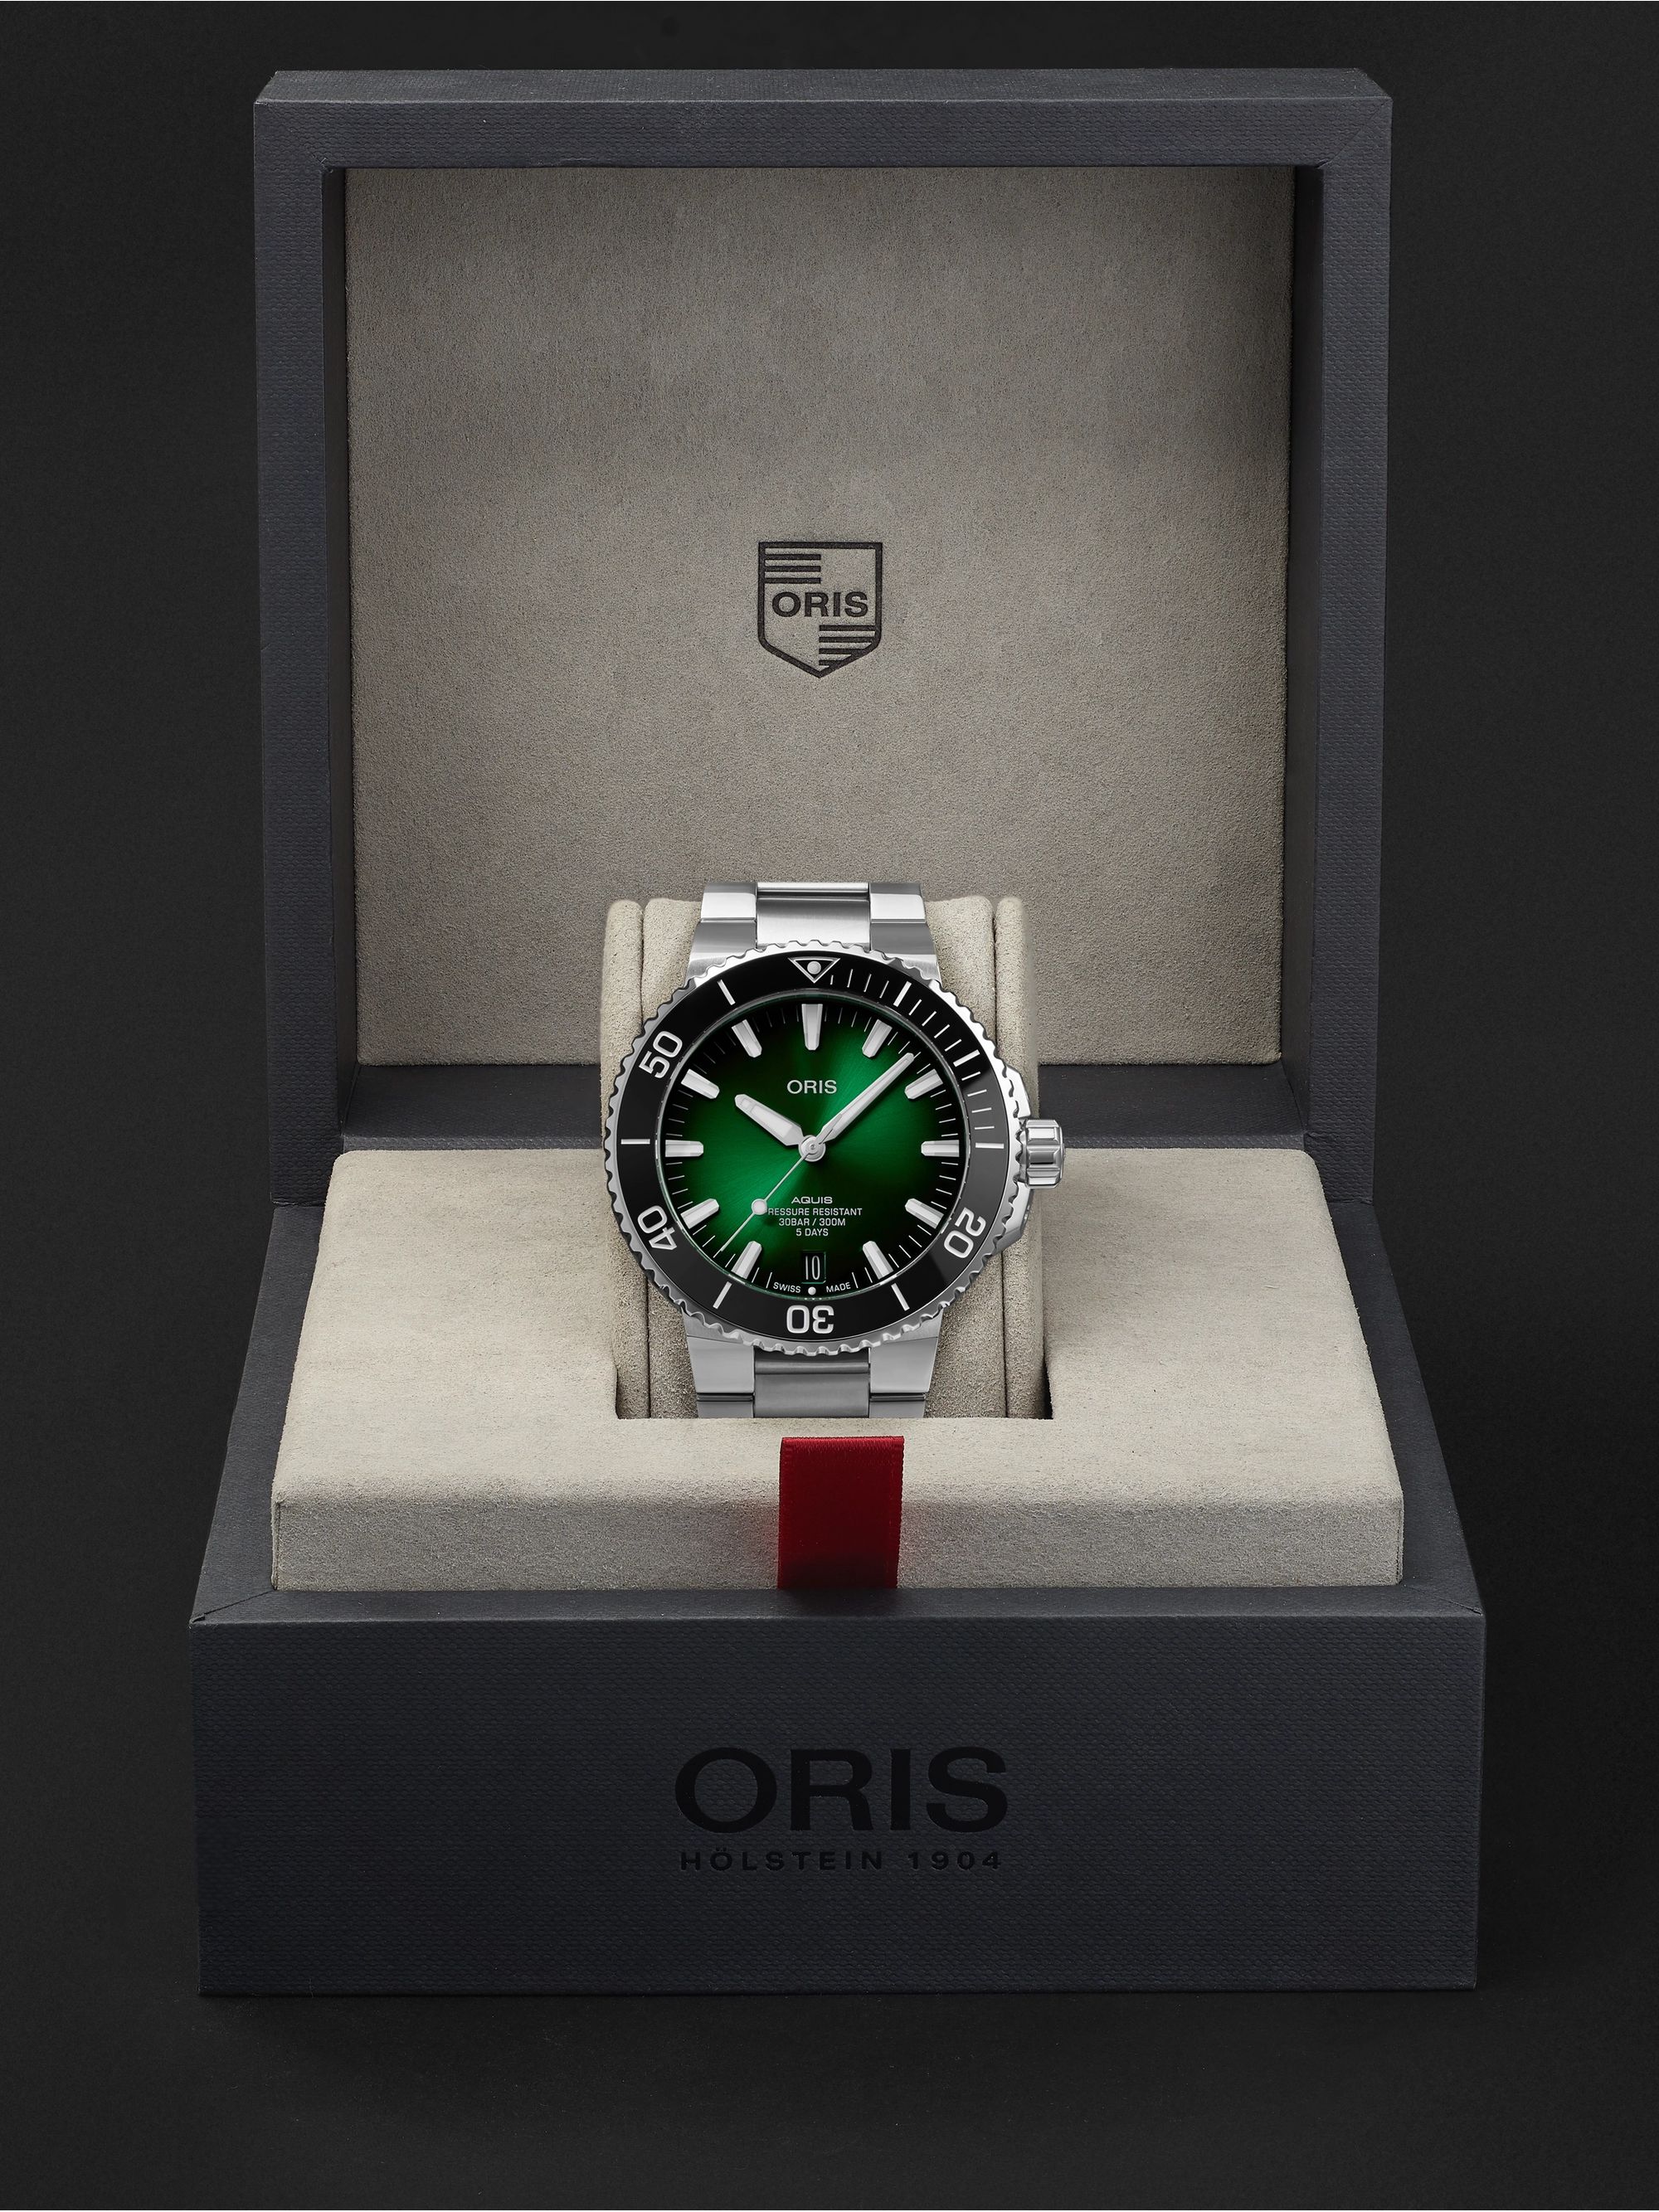 ORIS Aquis Date Calibre 400 Automatic 43.5mm Stainless Steel Watch, Ref. No. 01 400 7769 4157-07 8 22 09PEB